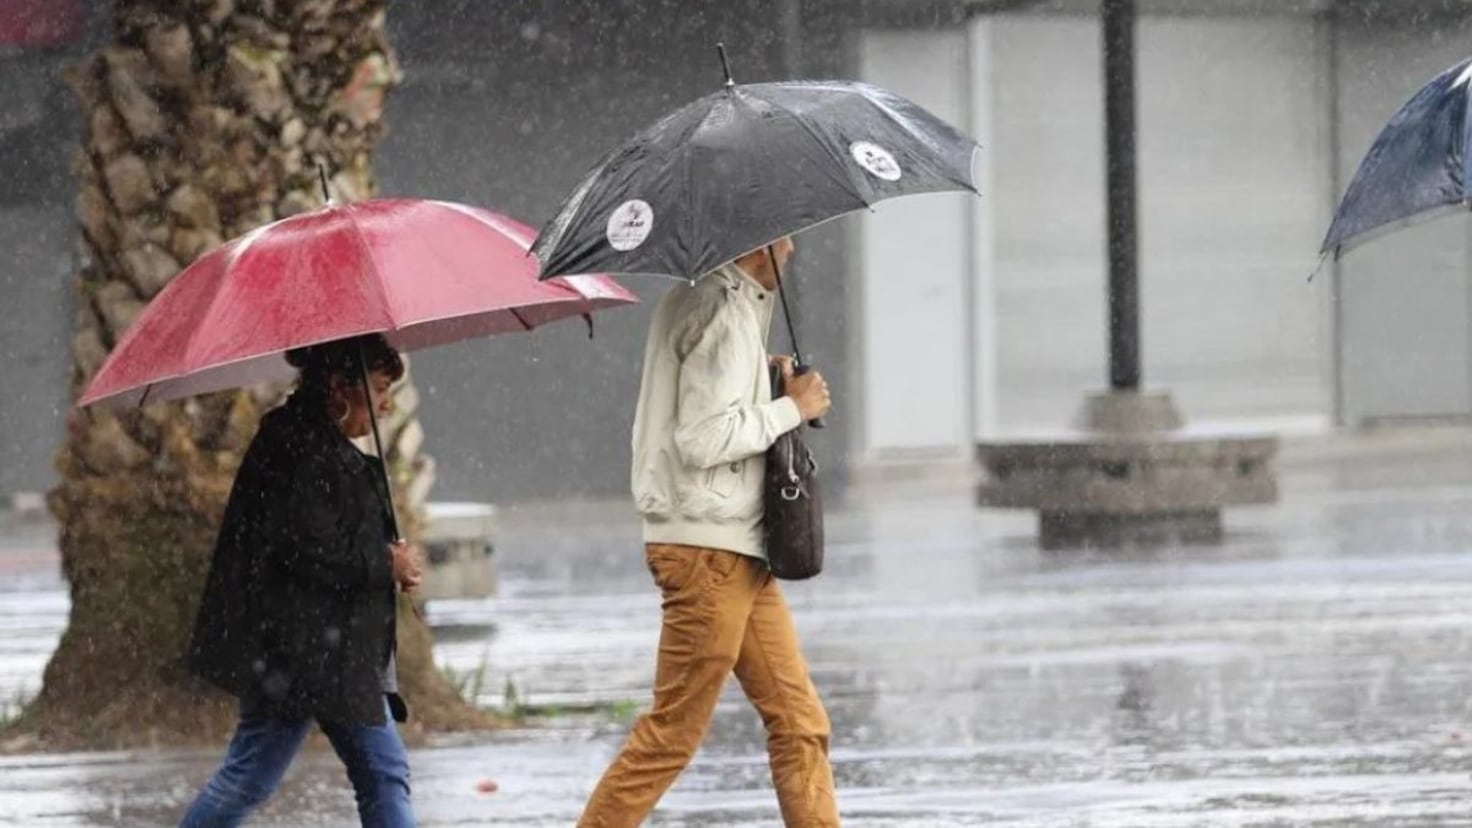 AEMET announces rain and storms for the weekend: affected areas
